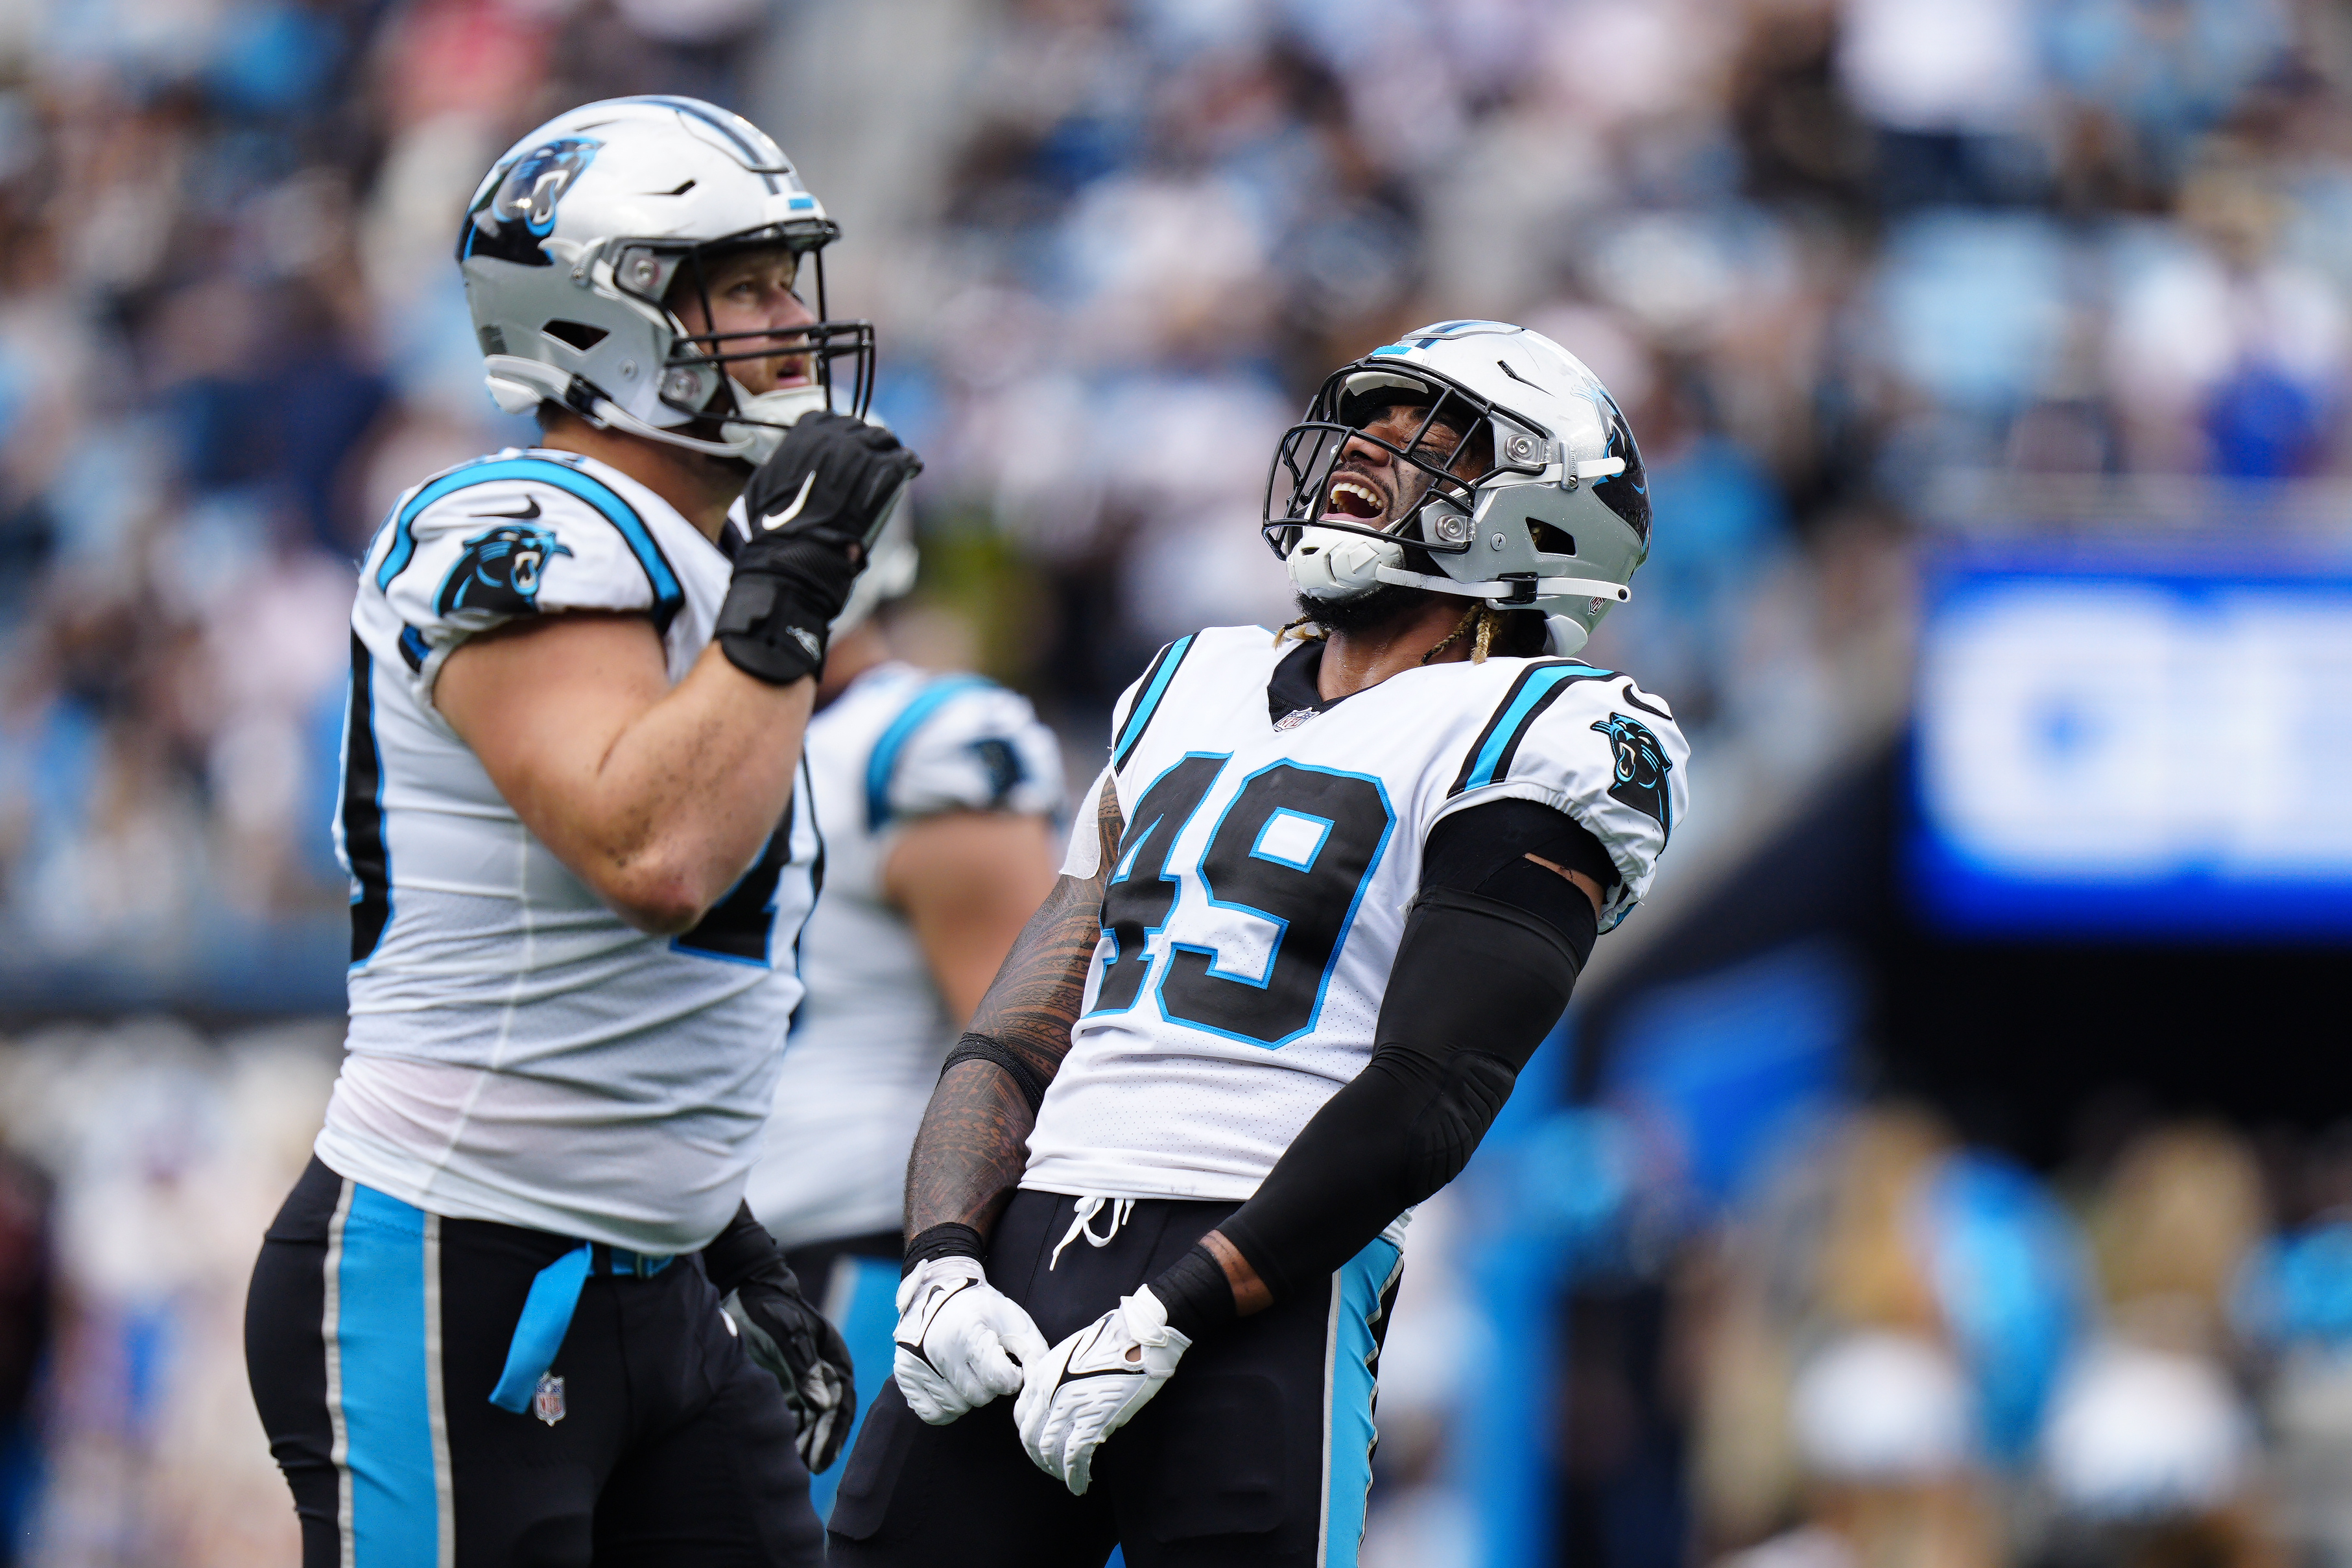 Panthers lose to Cardinals after offense falls flat, commits three turnovers